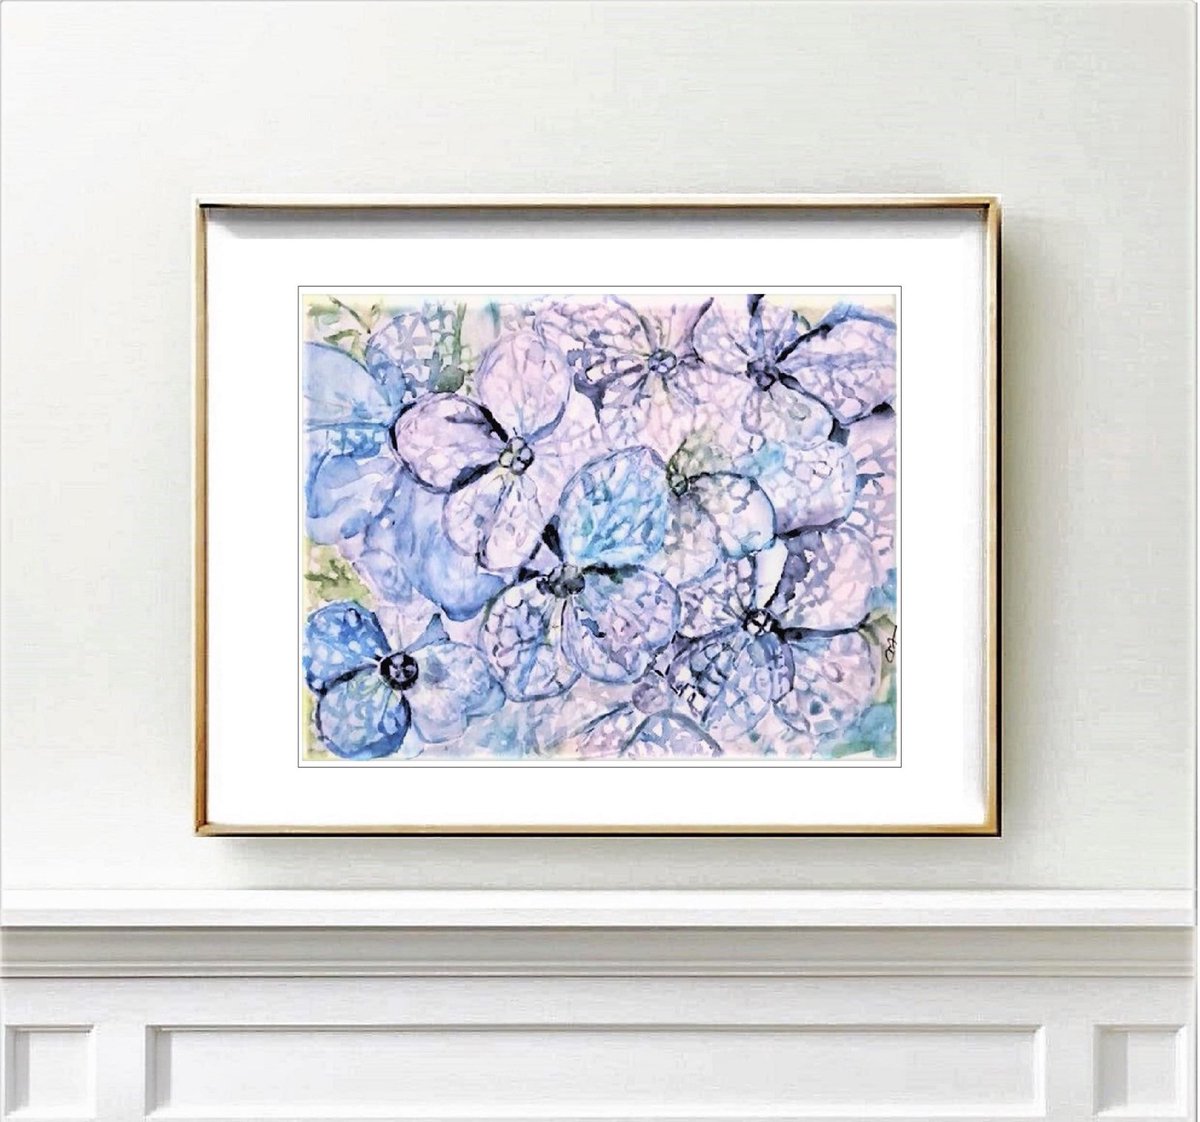 Excited to share this item from my #etsy shop: Blue Flowers Painting Printable Watercolor Floral Print Blue Minimalist Flowers Art INSTANT DOWNLOAD Printable Wall Decorations #hydrangeapainting  #bluefloralpainting #flowersprintable #instantdownload etsy.me/3rFr6Ak